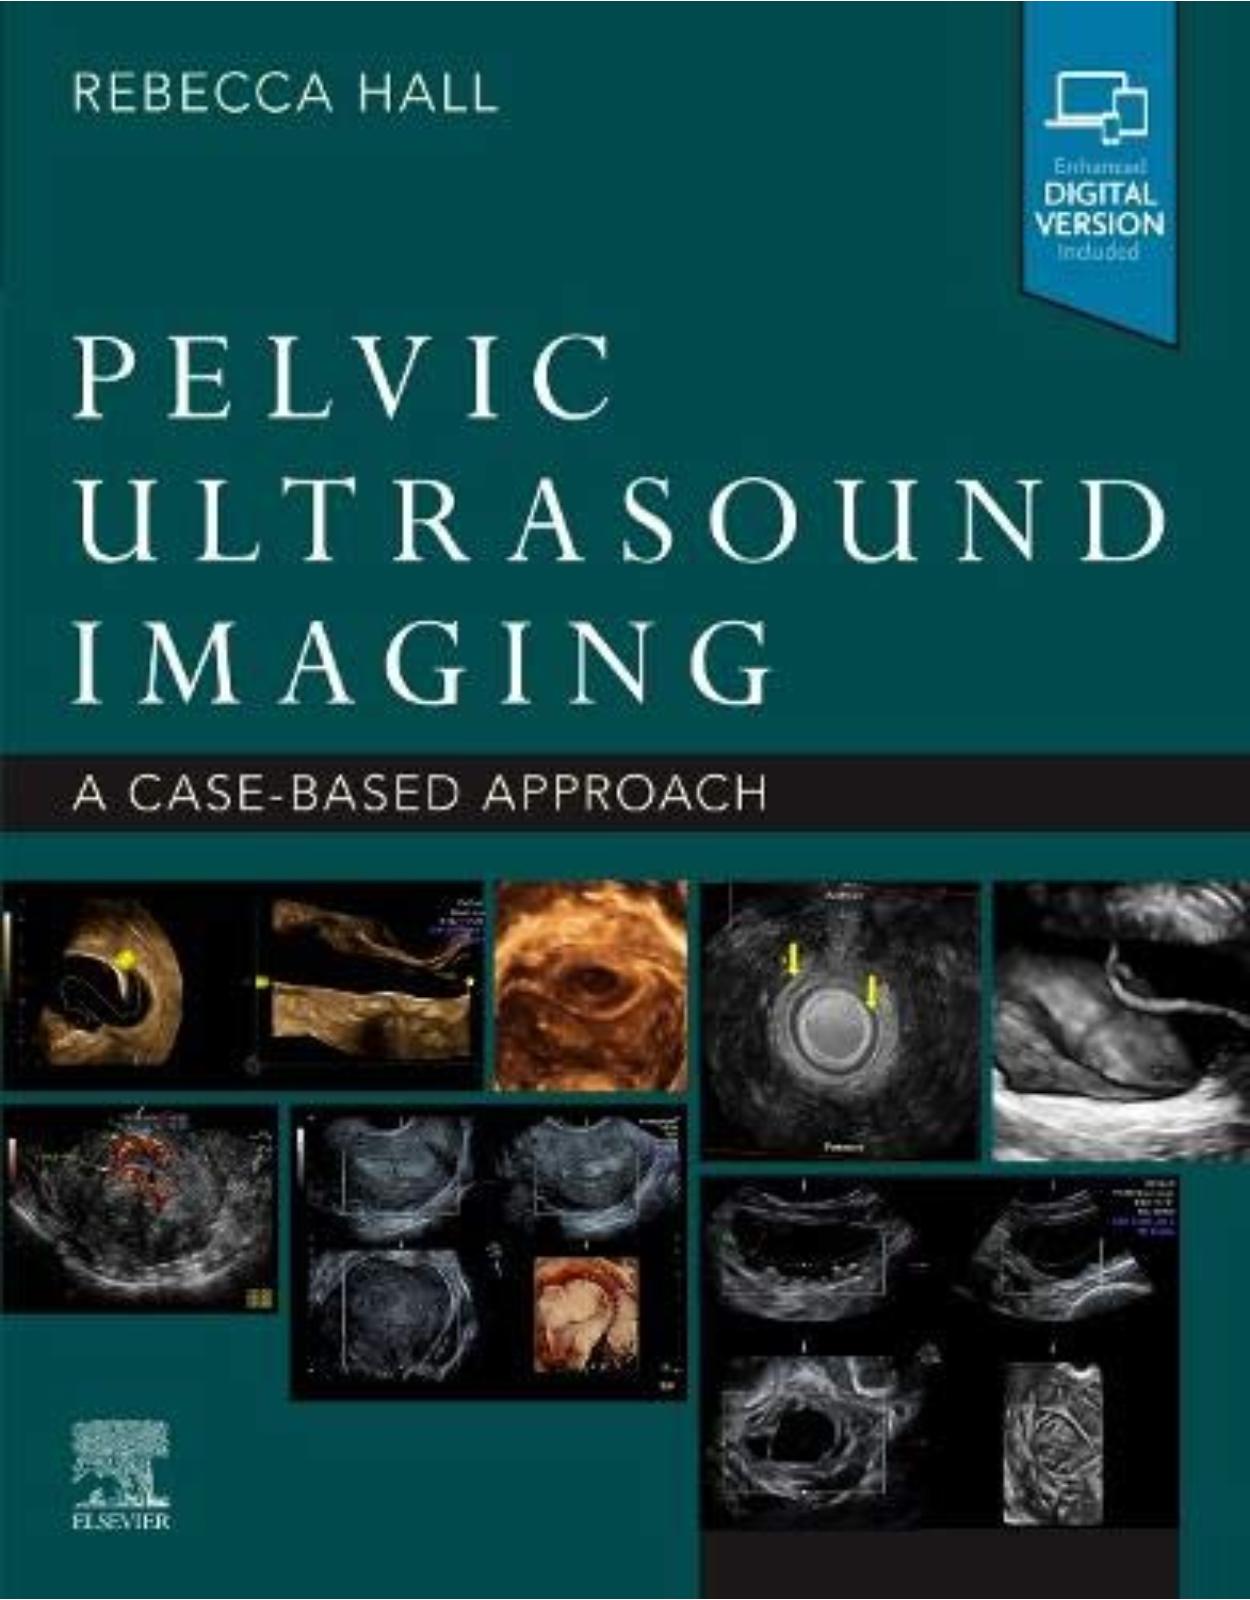 Pelvic Ultrasound Imaging: A Cased-Based Approach